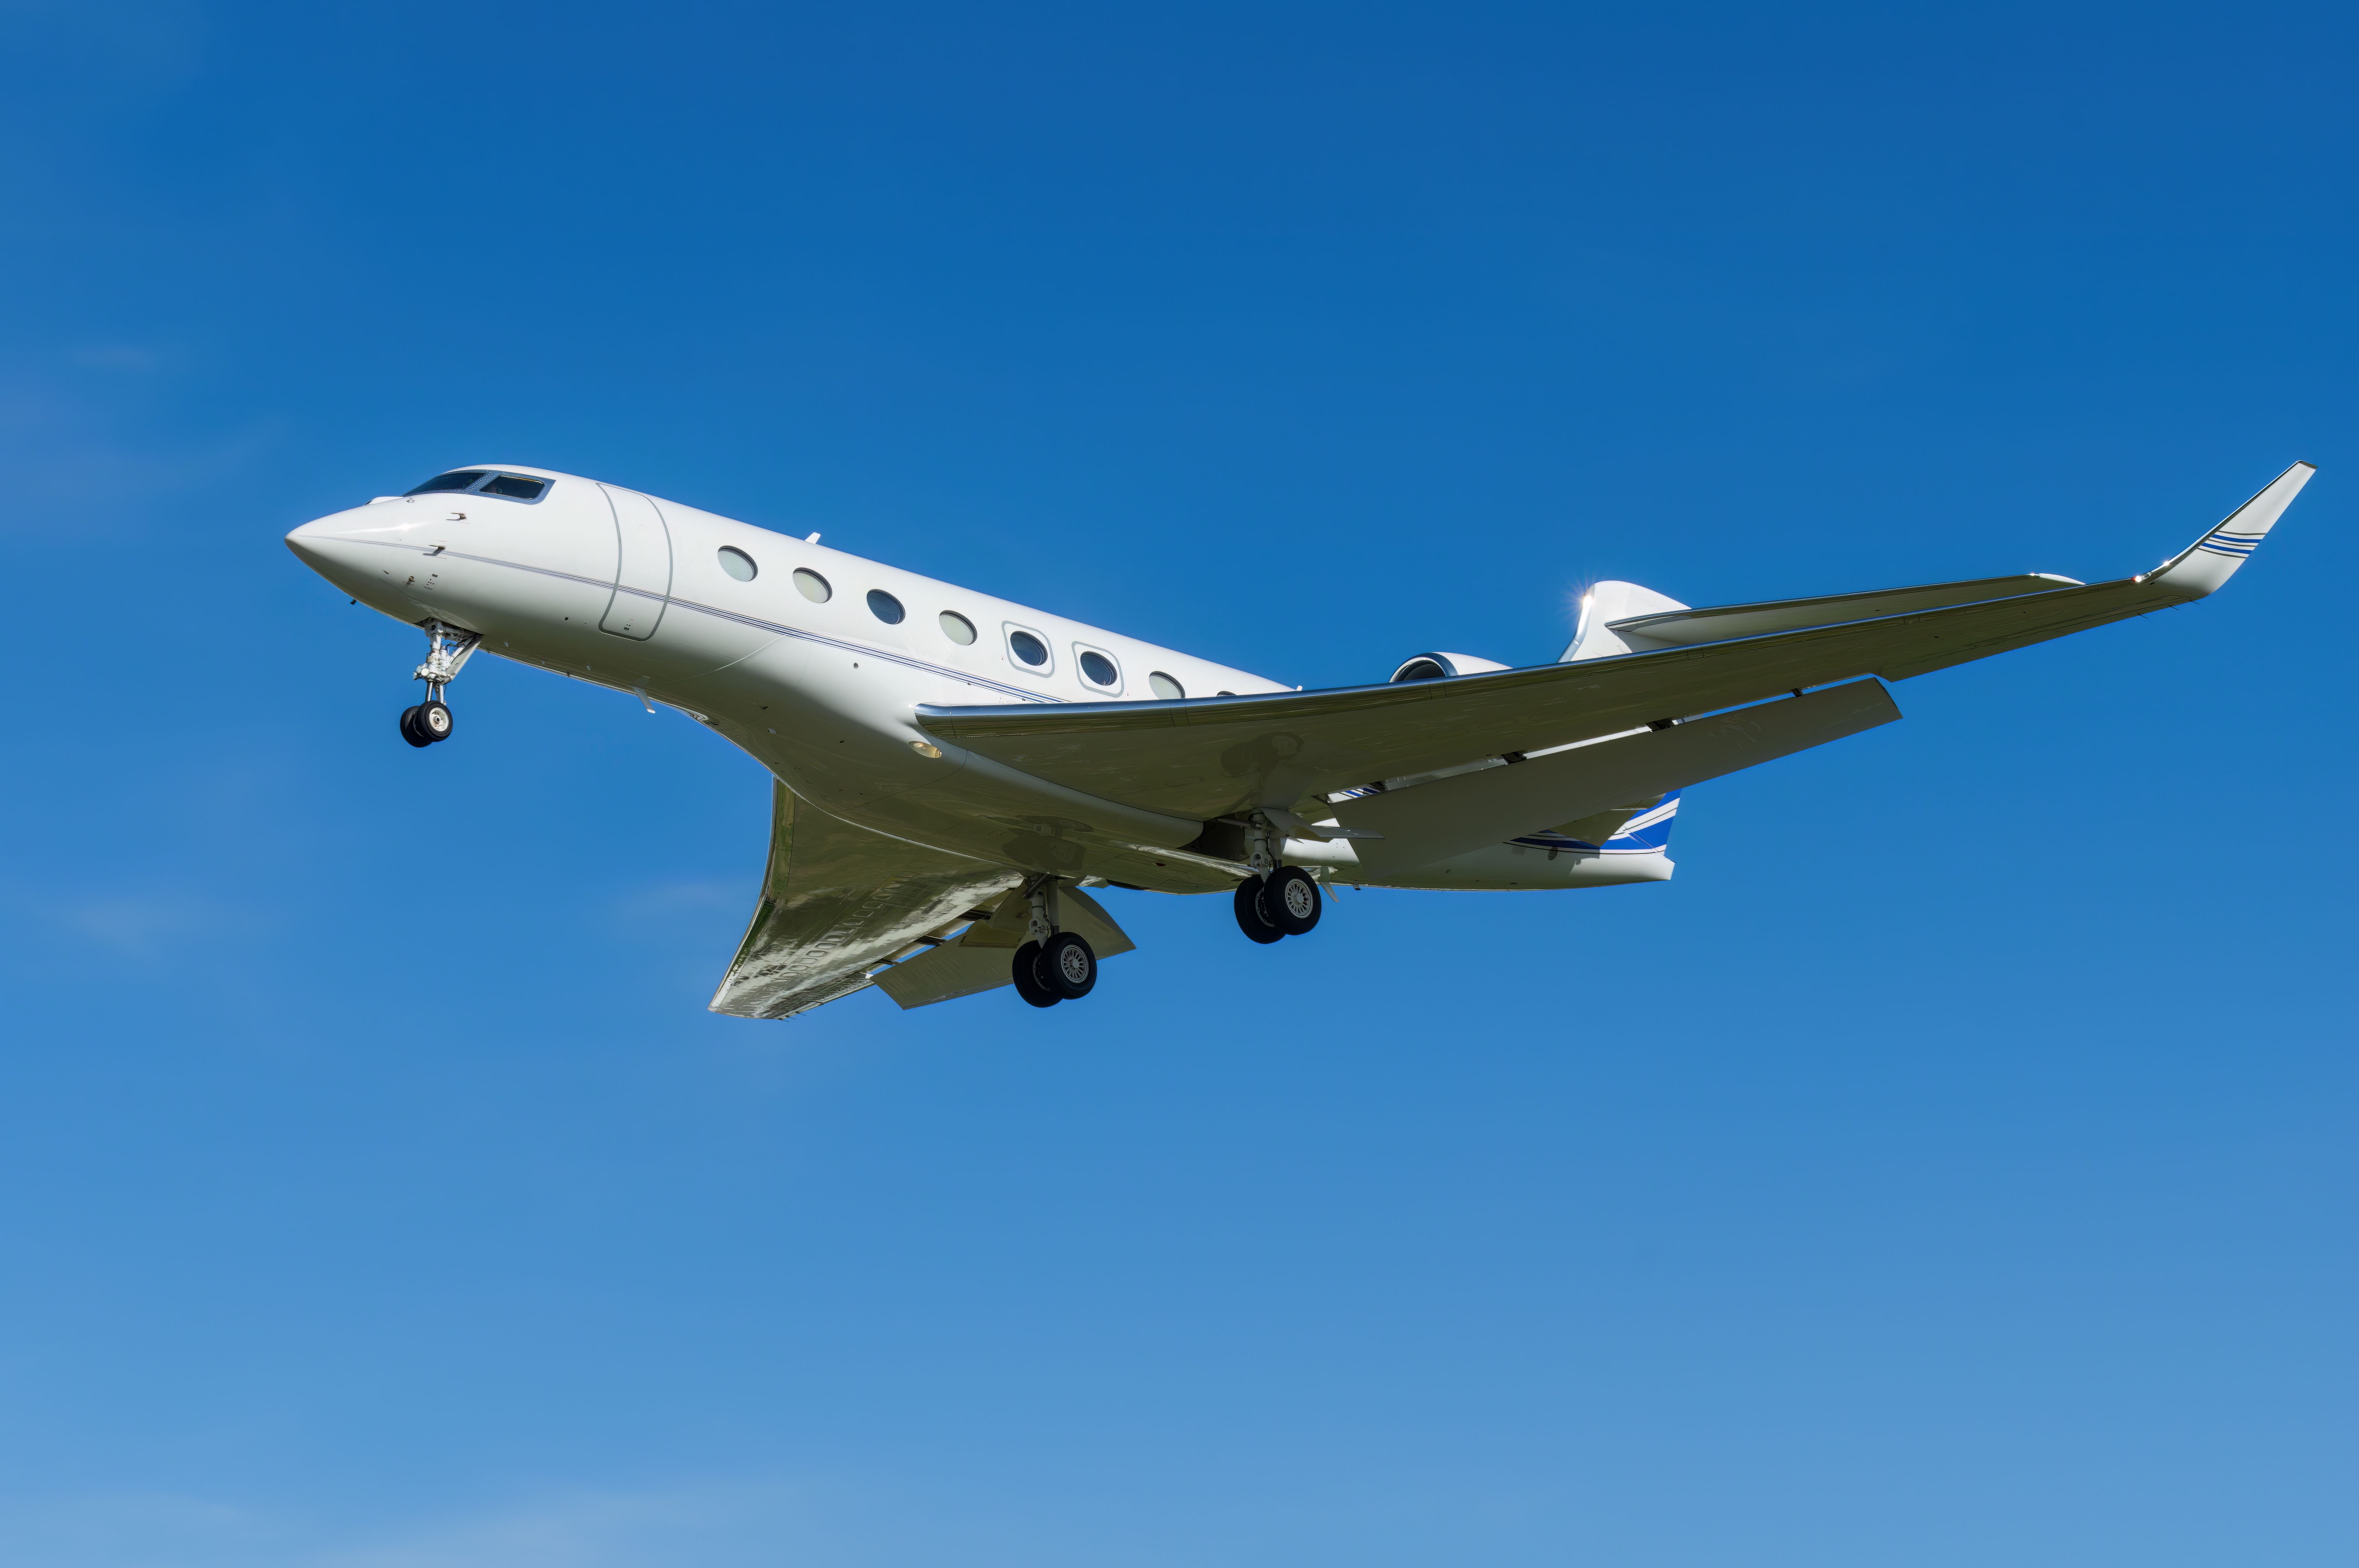 A Gulfstream G-650 flying in the air.